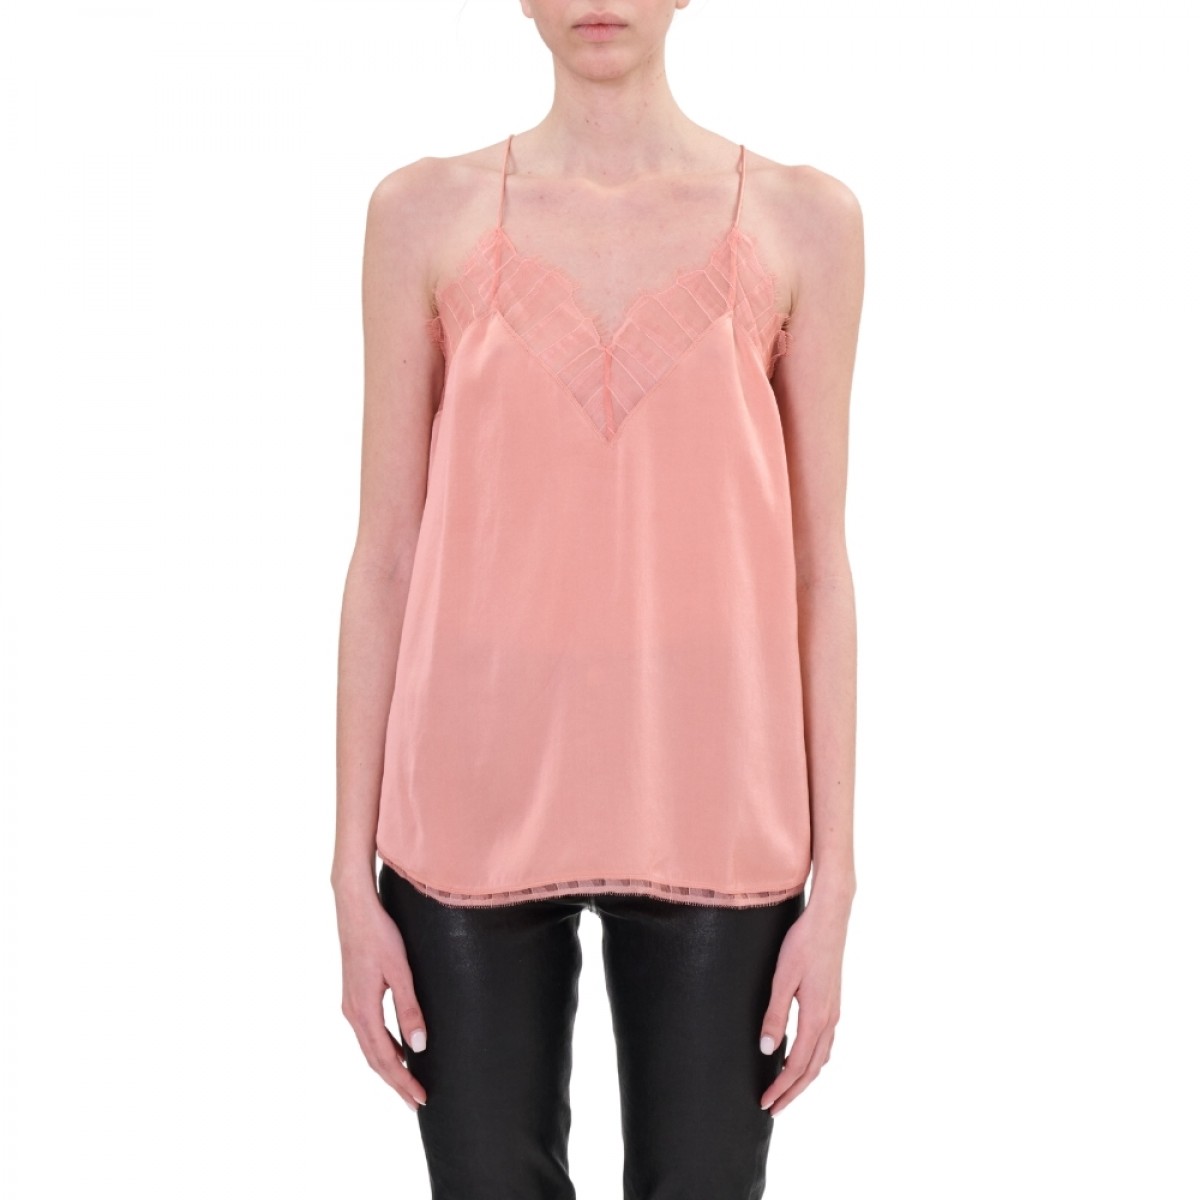 berwyn silk camisole - coral pink - front